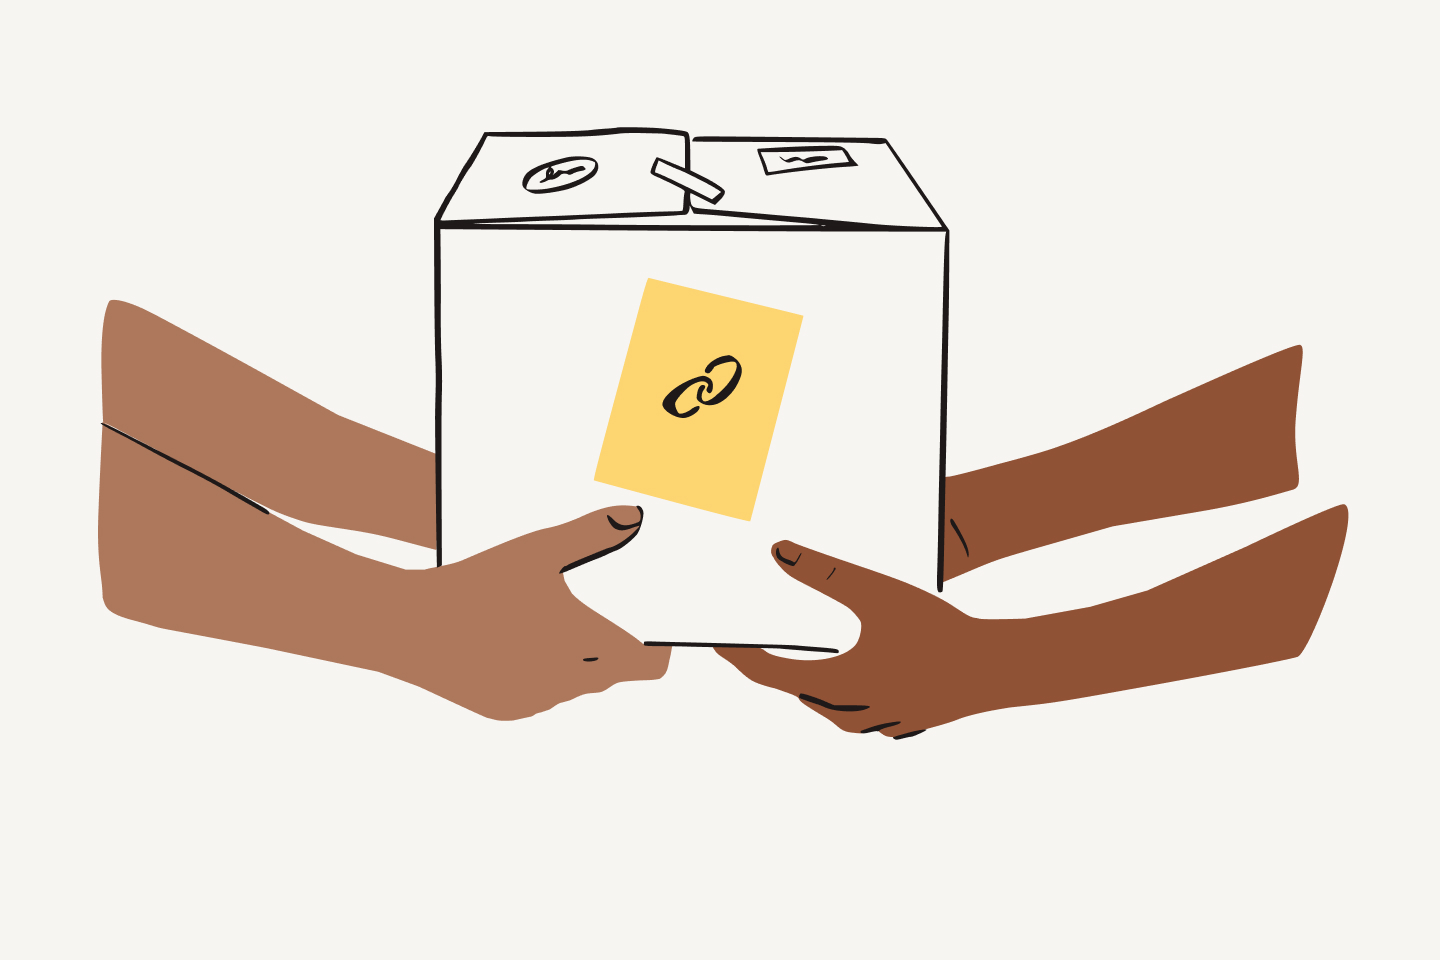 Two people carry a box with a yellow label and the link icon on it.